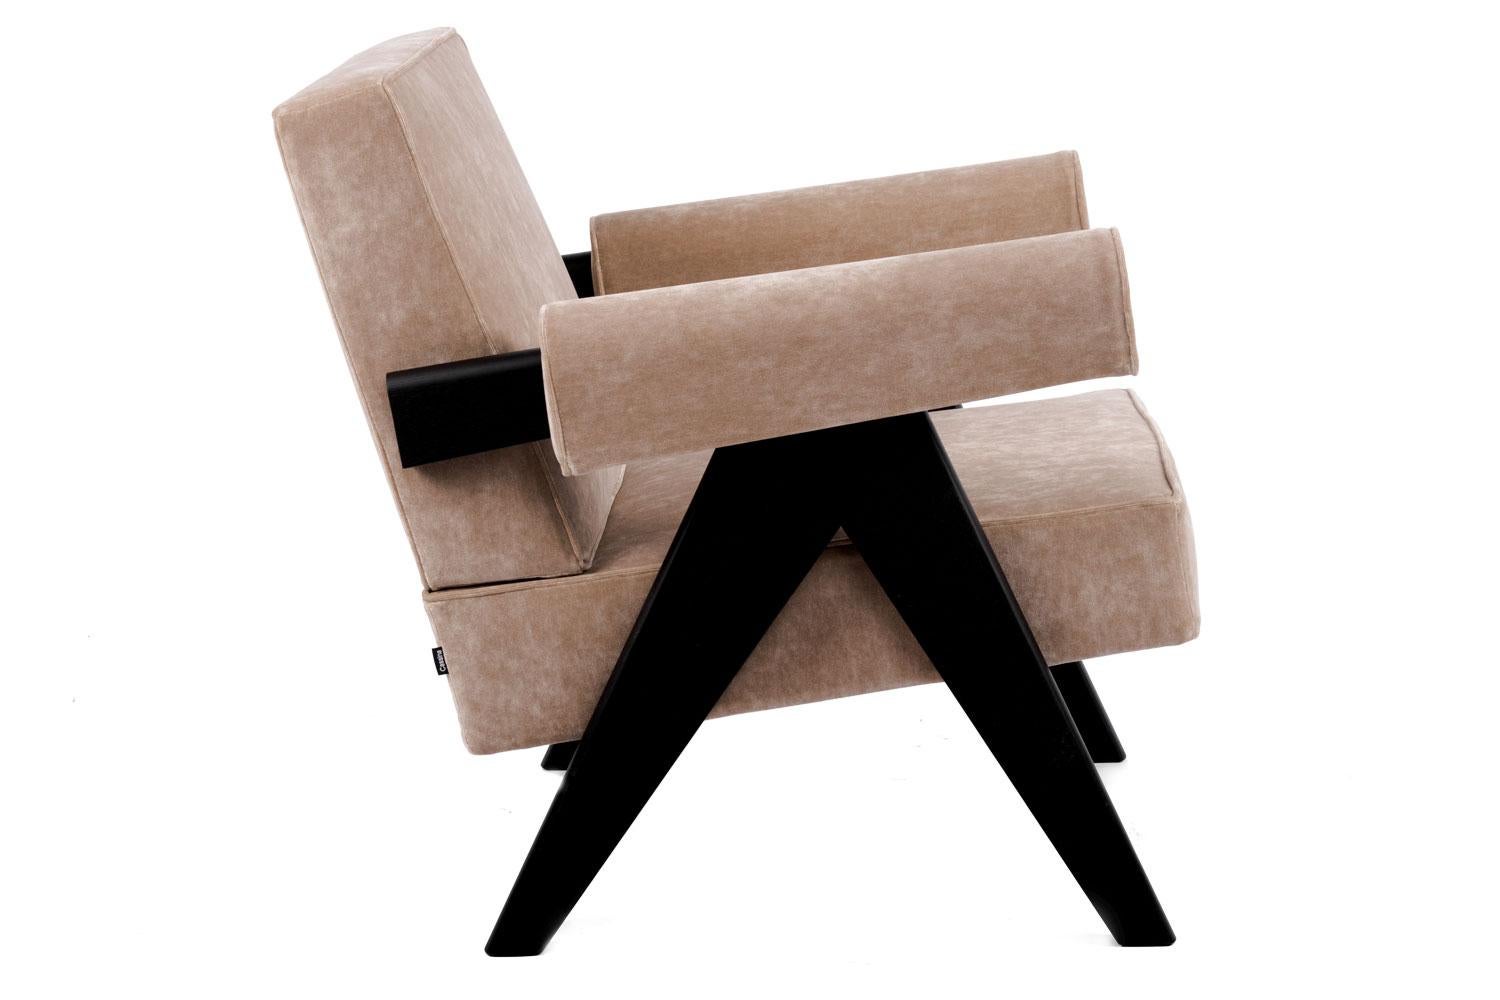 Capitol complex armchair by Cassina

Overstuffed armchair with “V” support structure theme. Exposed wooden parts are the rests, connecting crossbars, and the external joints between the arms and the backrest. The armrests’ padding almost